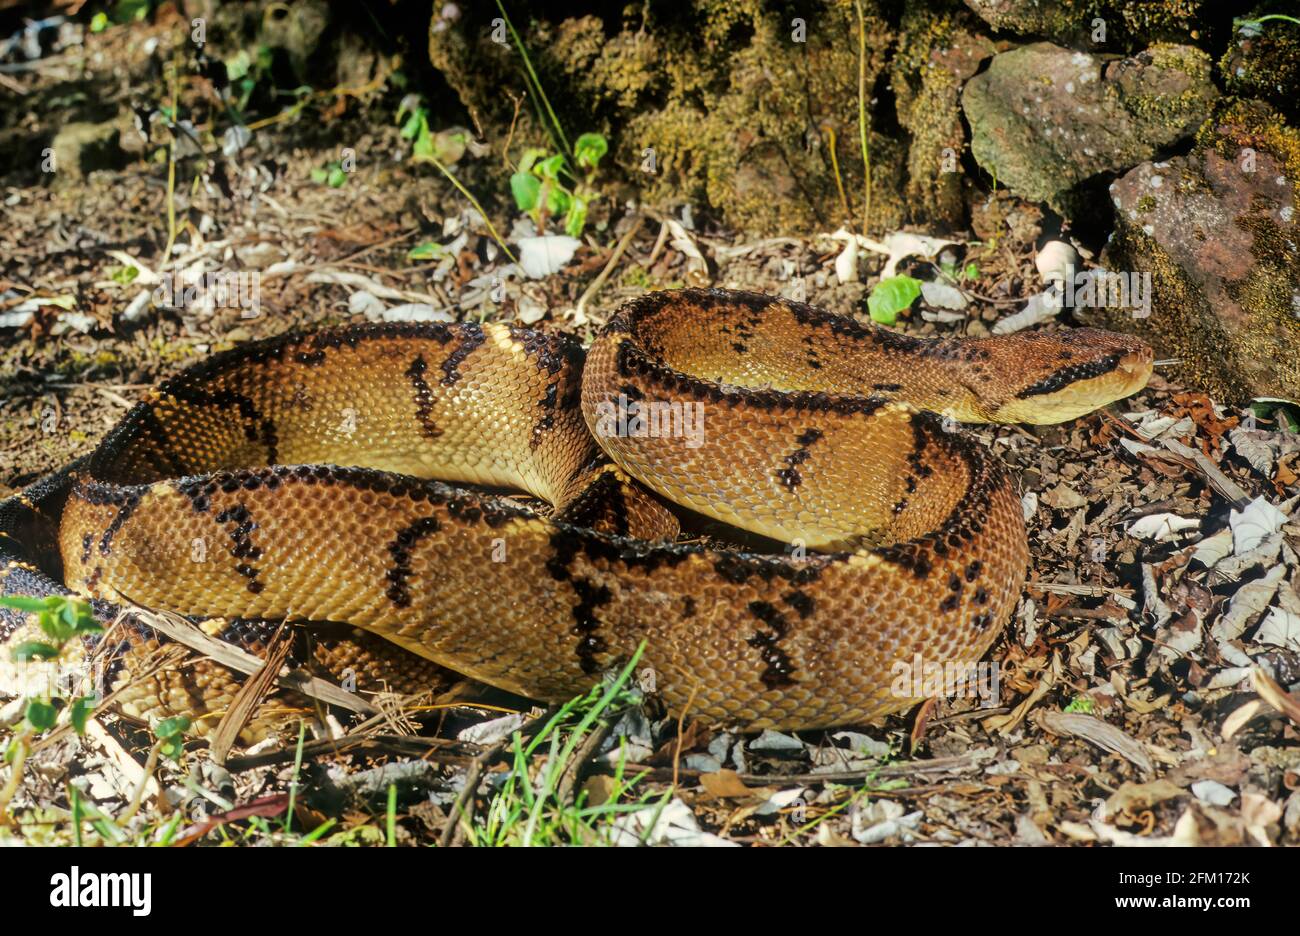 Lachesis muta, also known as the Southern American bushmaster or Atlantic bushmaster, is a venomous pit viper species found in South America. Stock Photo